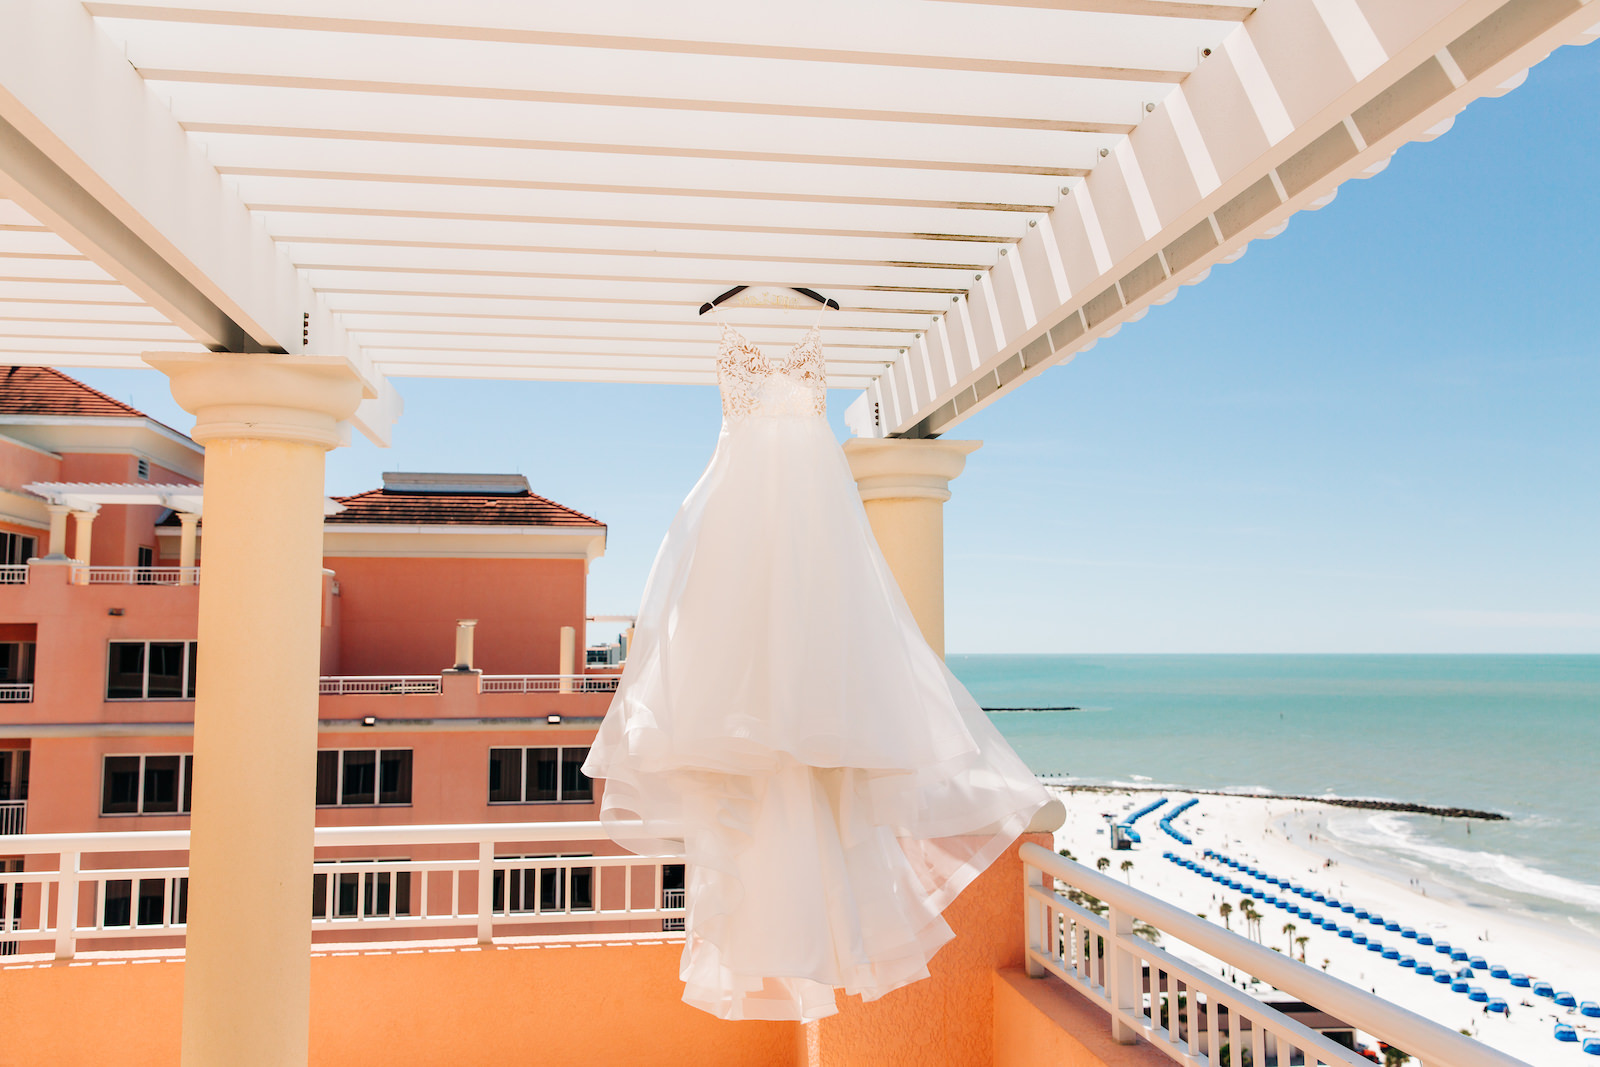 Florida Beachfront Wedding Venue with Hanging Mikaella Bridal Dress Full Tulle Skirt and Floral Lace Appliqué Bodice | Hyatt Regency Clearwater Beach